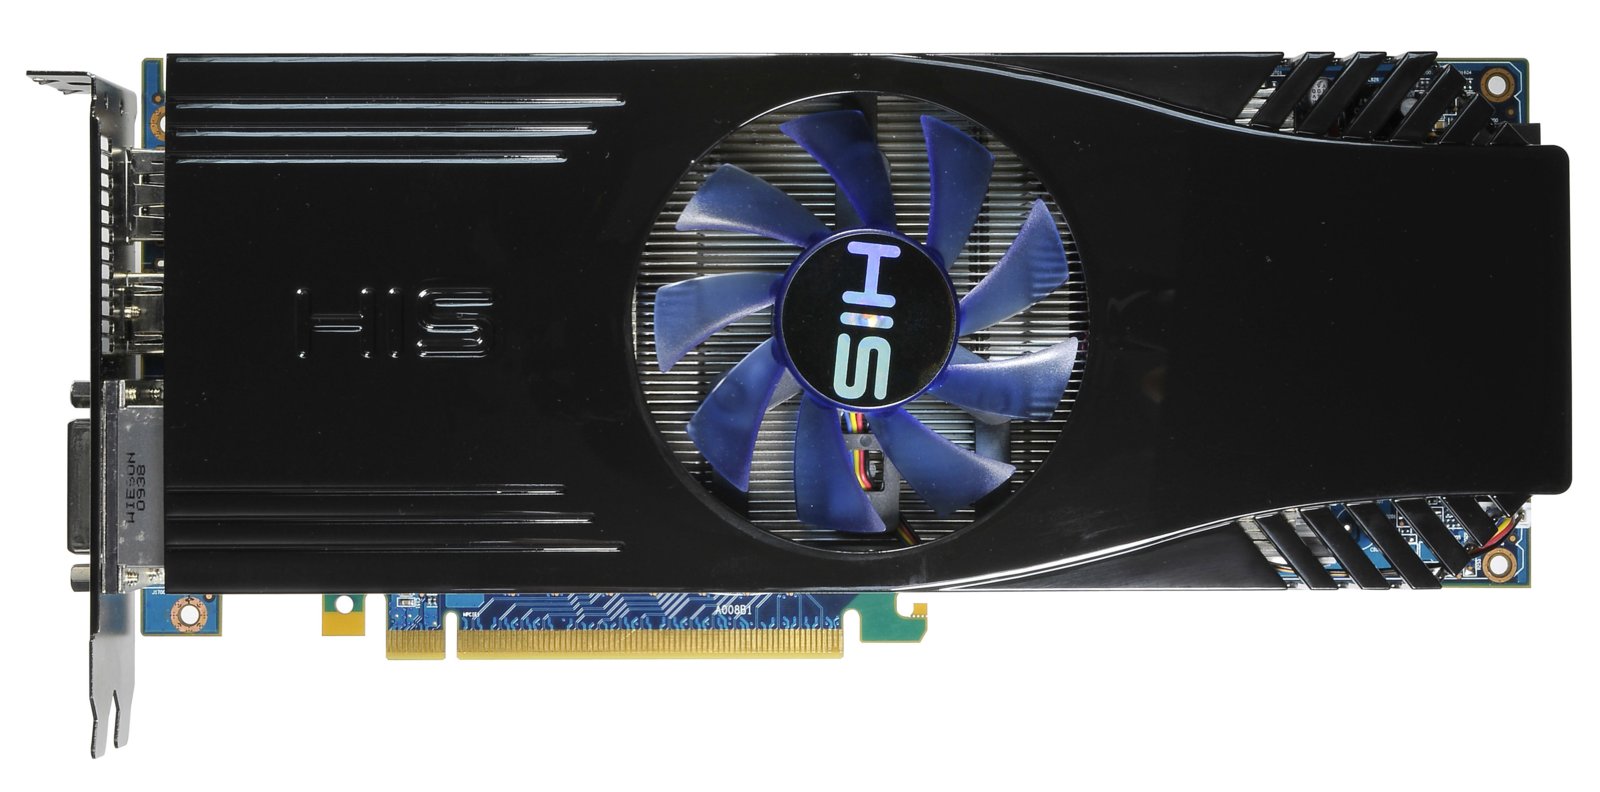 HIS HD 5830 iCooler V Turbo 1GB (256bit) GDDR5 PCIe (DirectX 11/ Eyefinity) < HD 5800 Series < Desktop < Products | HIS Graphic Cards